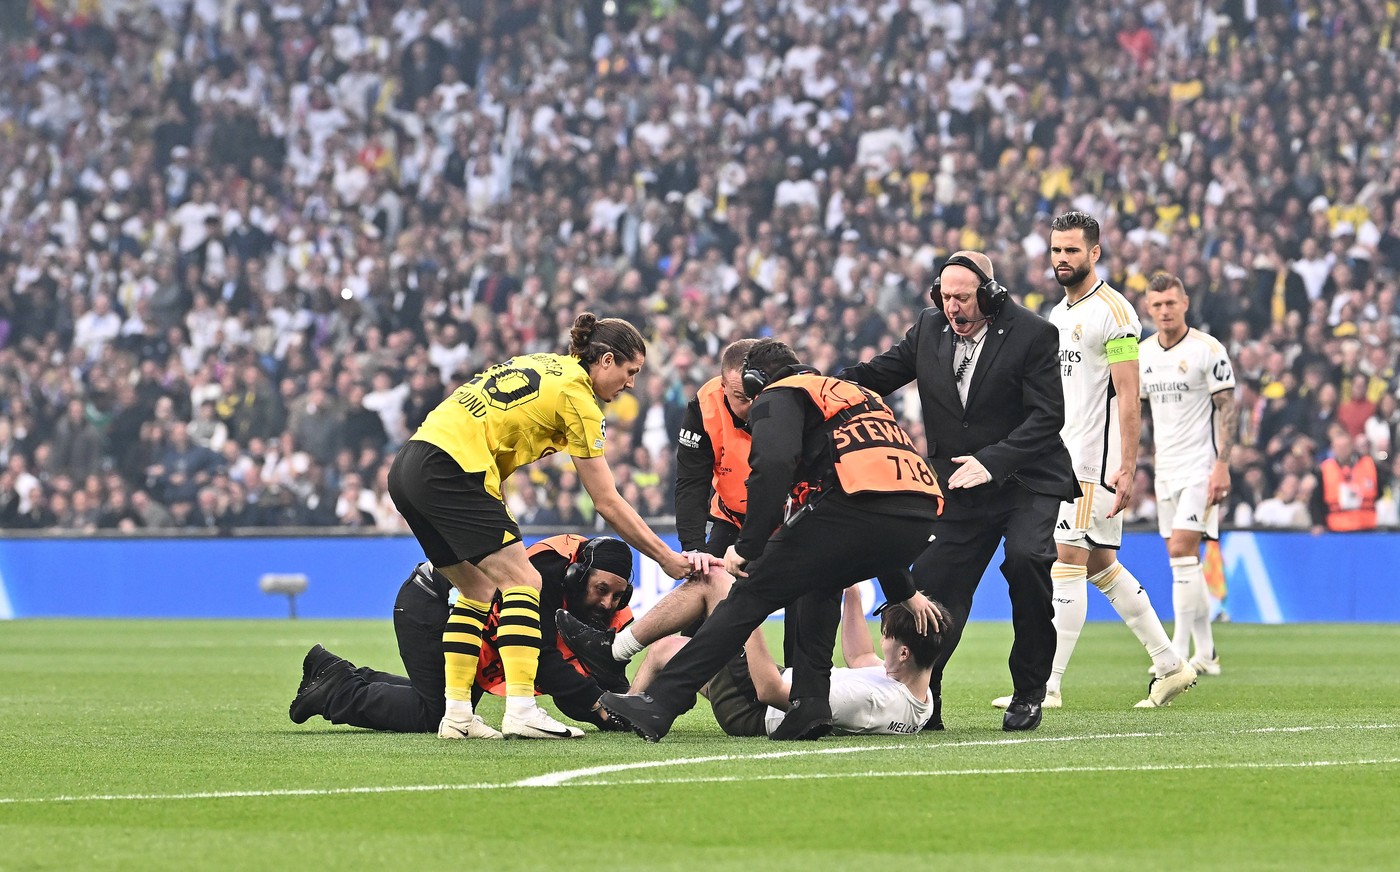 01.06.2024, xfux, Fussball UEFA Champions League Finale 2024, Borussia Dortmund - Real Madrid, emspor, v.l. Marcel Sabitzer Borussia Dortmund legt den Flitzer stoppt ihn DFL/DFB REGULATIONS PROHIBIT ANY USE OF PHOTOGRAPHS as IMAGE SEQUENCES and/or QUASI-VIDEO London *** 01 06 2024, xfux, Football UEFA Champions League Final 2024, Borussia Dortmund Real Madrid, emspor, v l Marcel Sabitzer Borussia Dortmund lays the streaker stops him DFL DFB REGULATIONS PROHIBIT ANY USE OF PHOTOGRAPHS as IMAGE SEQUENCES and or QUASI VIDEO London,Image: 878185323, License: Rights-managed, Restrictions: Credit images as 